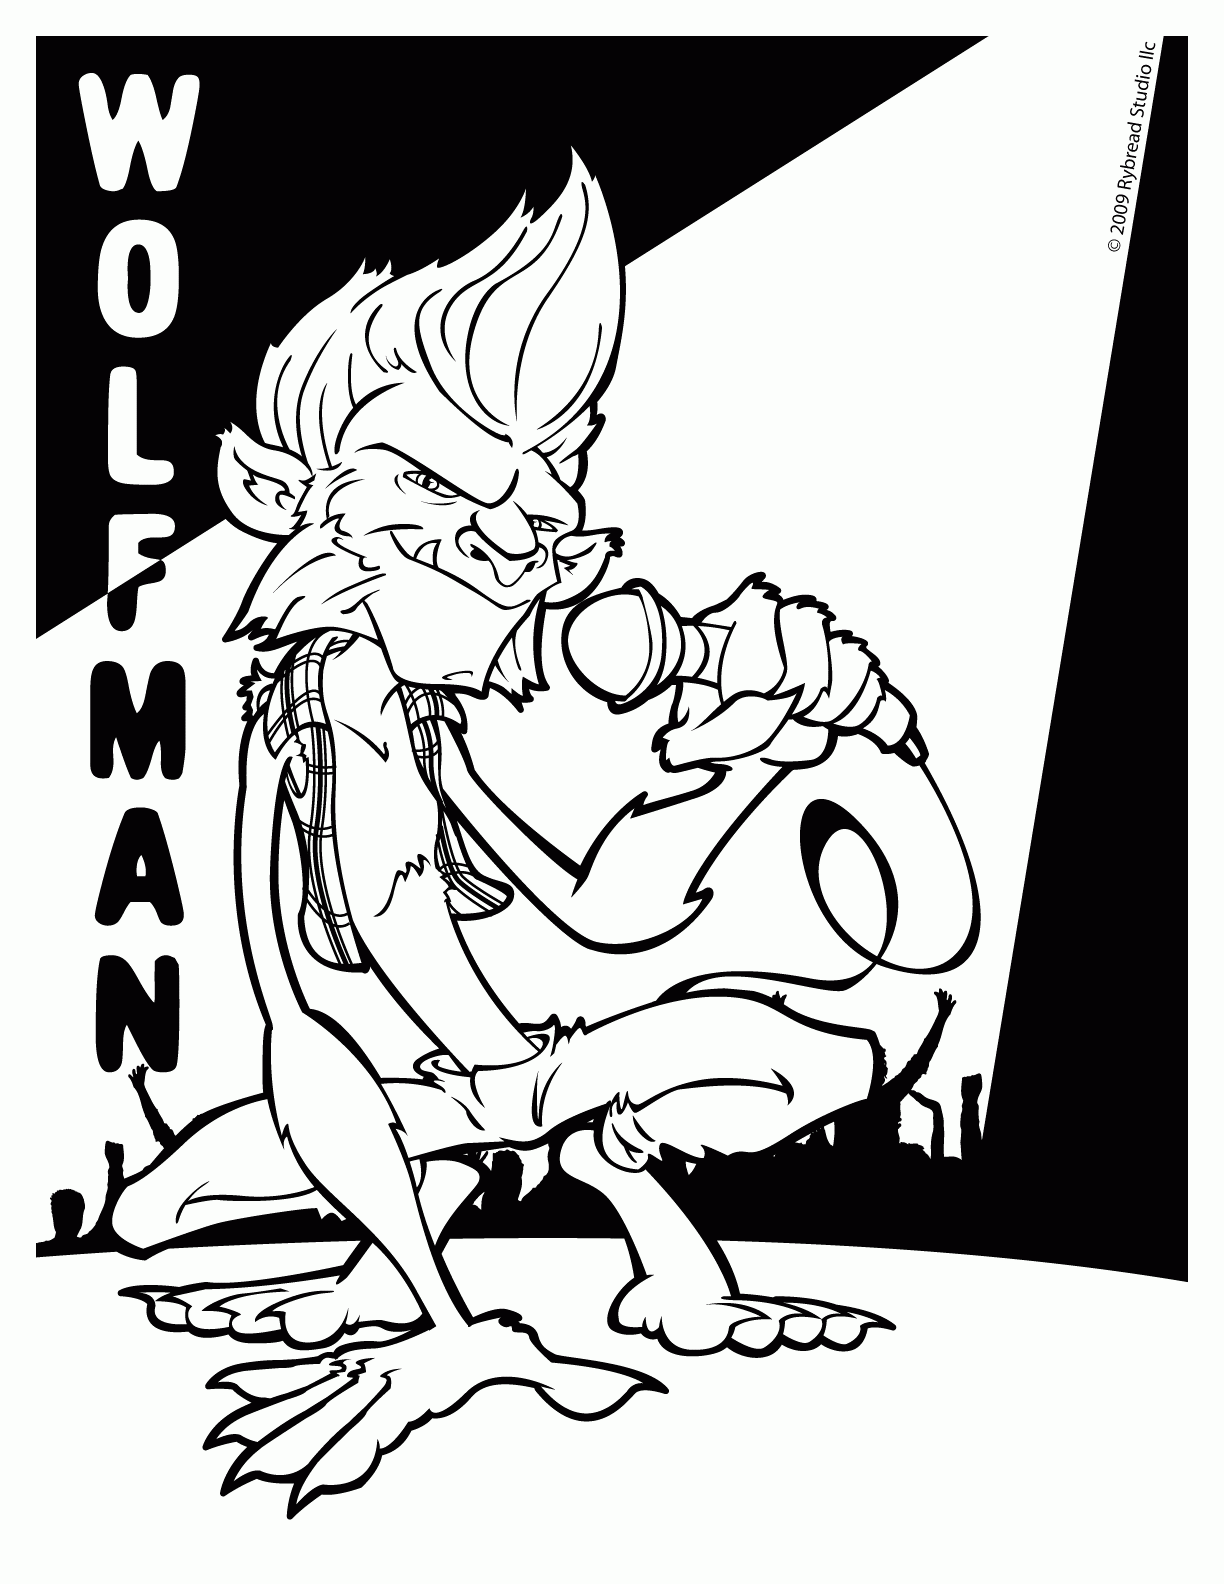 Werewolf Colouring Pages - Coloring Pages for Kids and for Adults